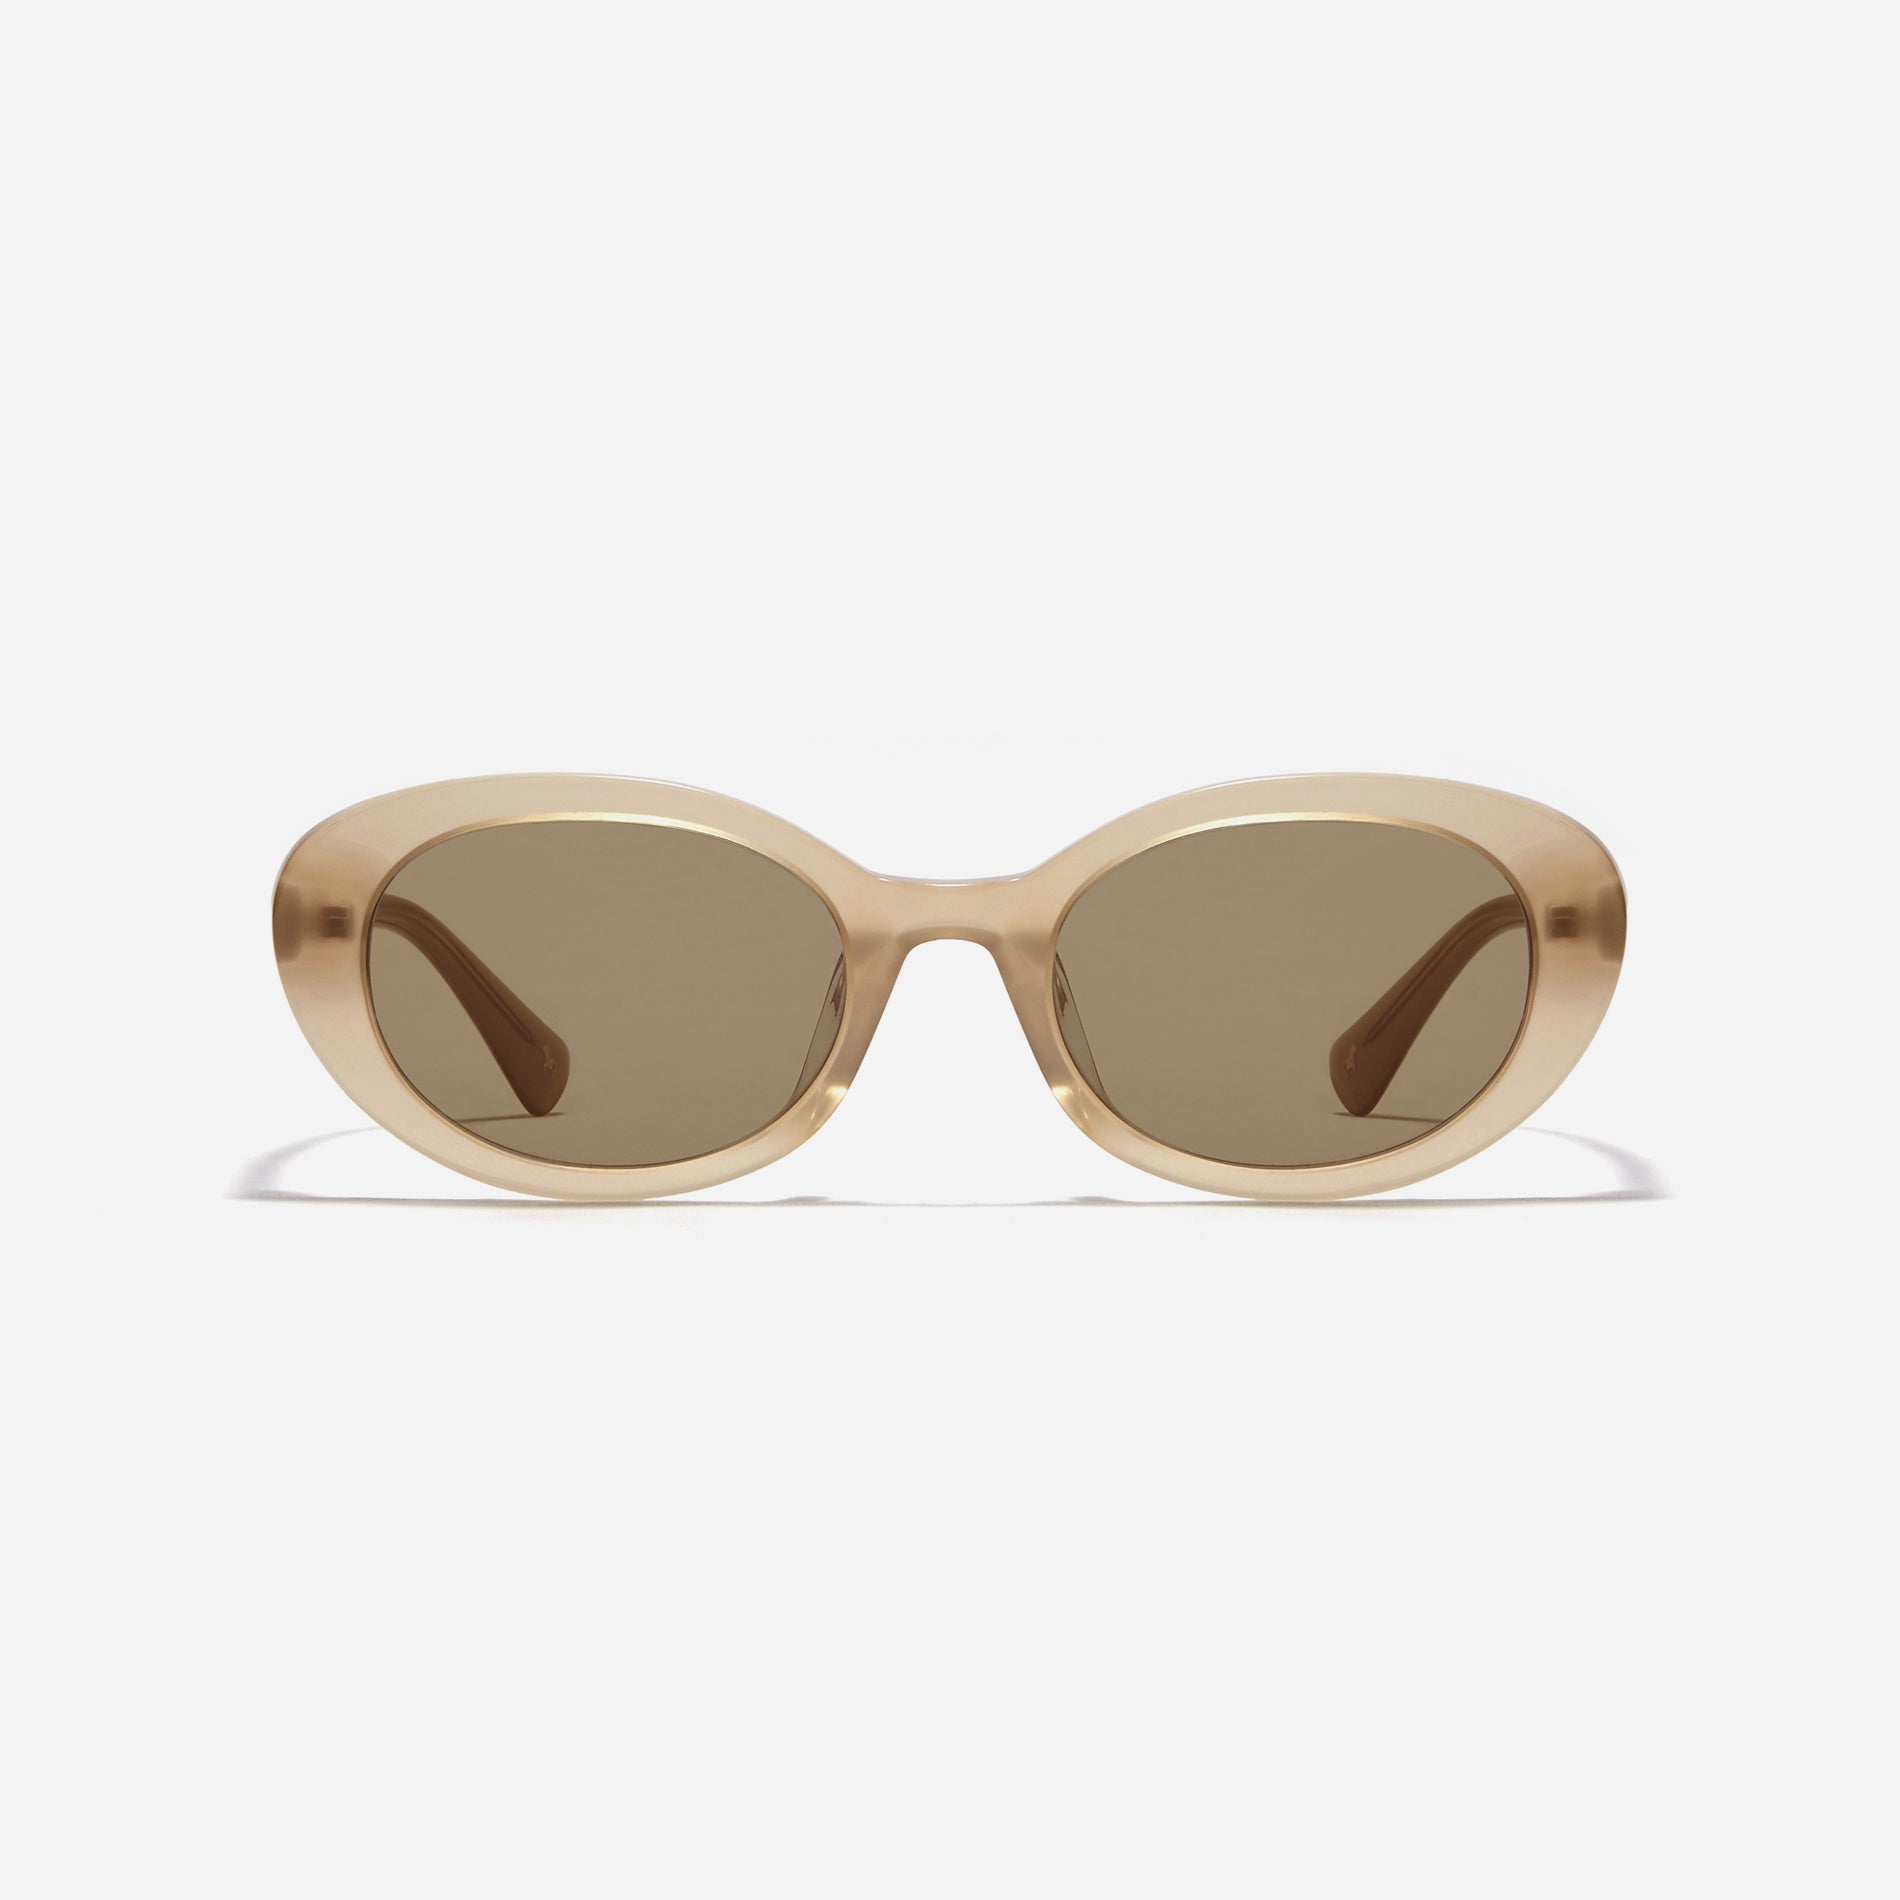 Round-shaped petite frame sunglasses with retro-inspired design that exudes chic and contemporary vibe